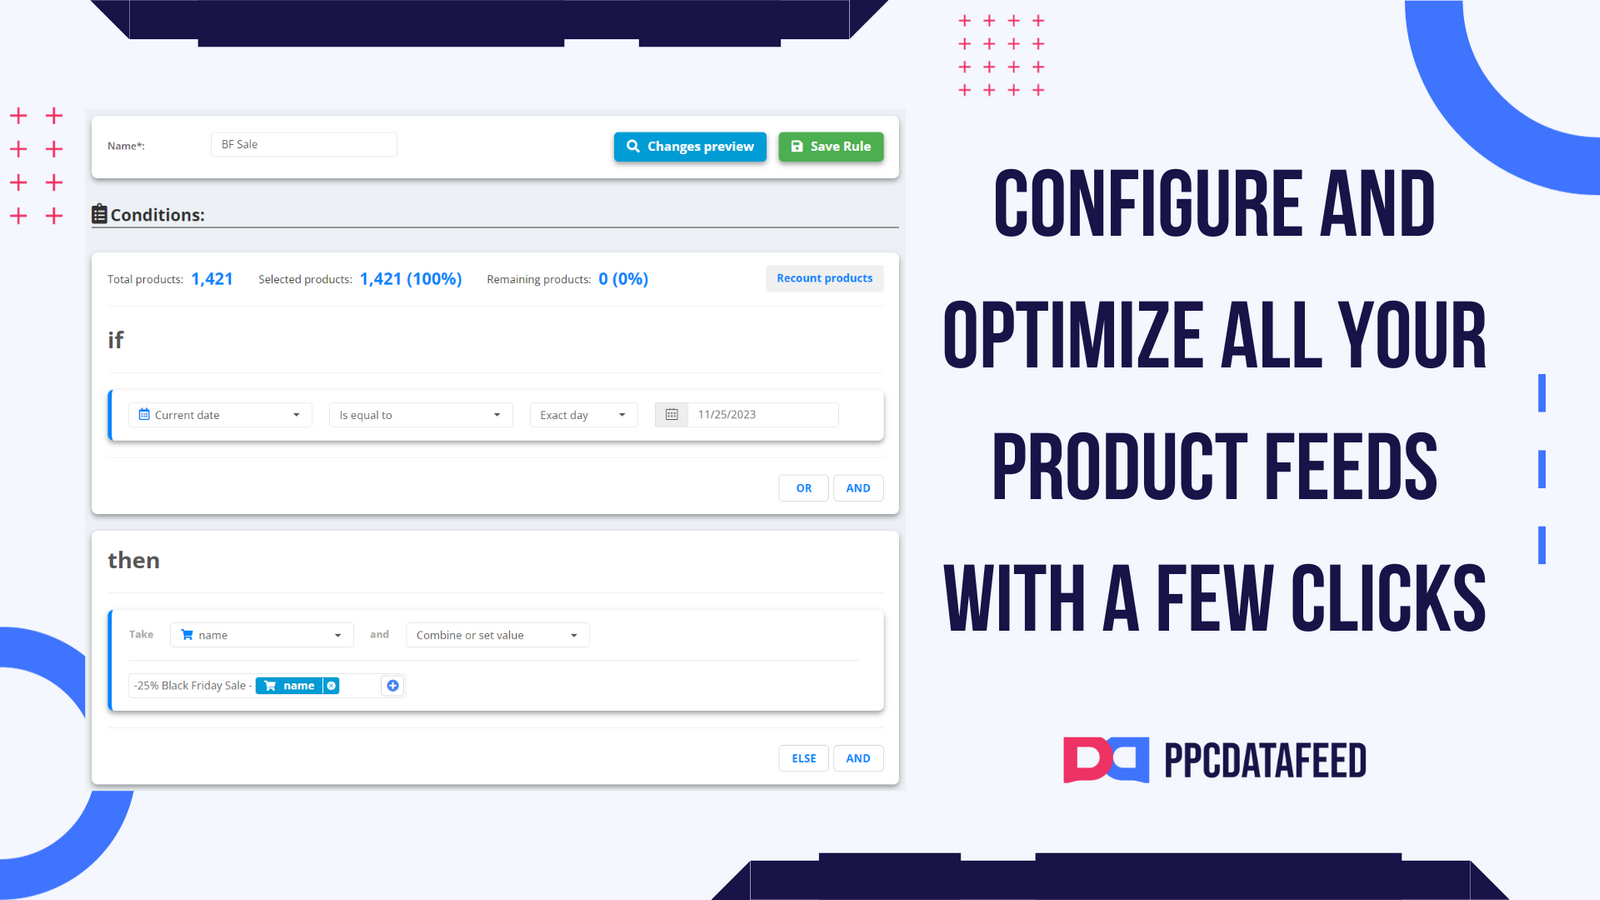 Configure and Optimize All Your Feeds With a Few Clicks